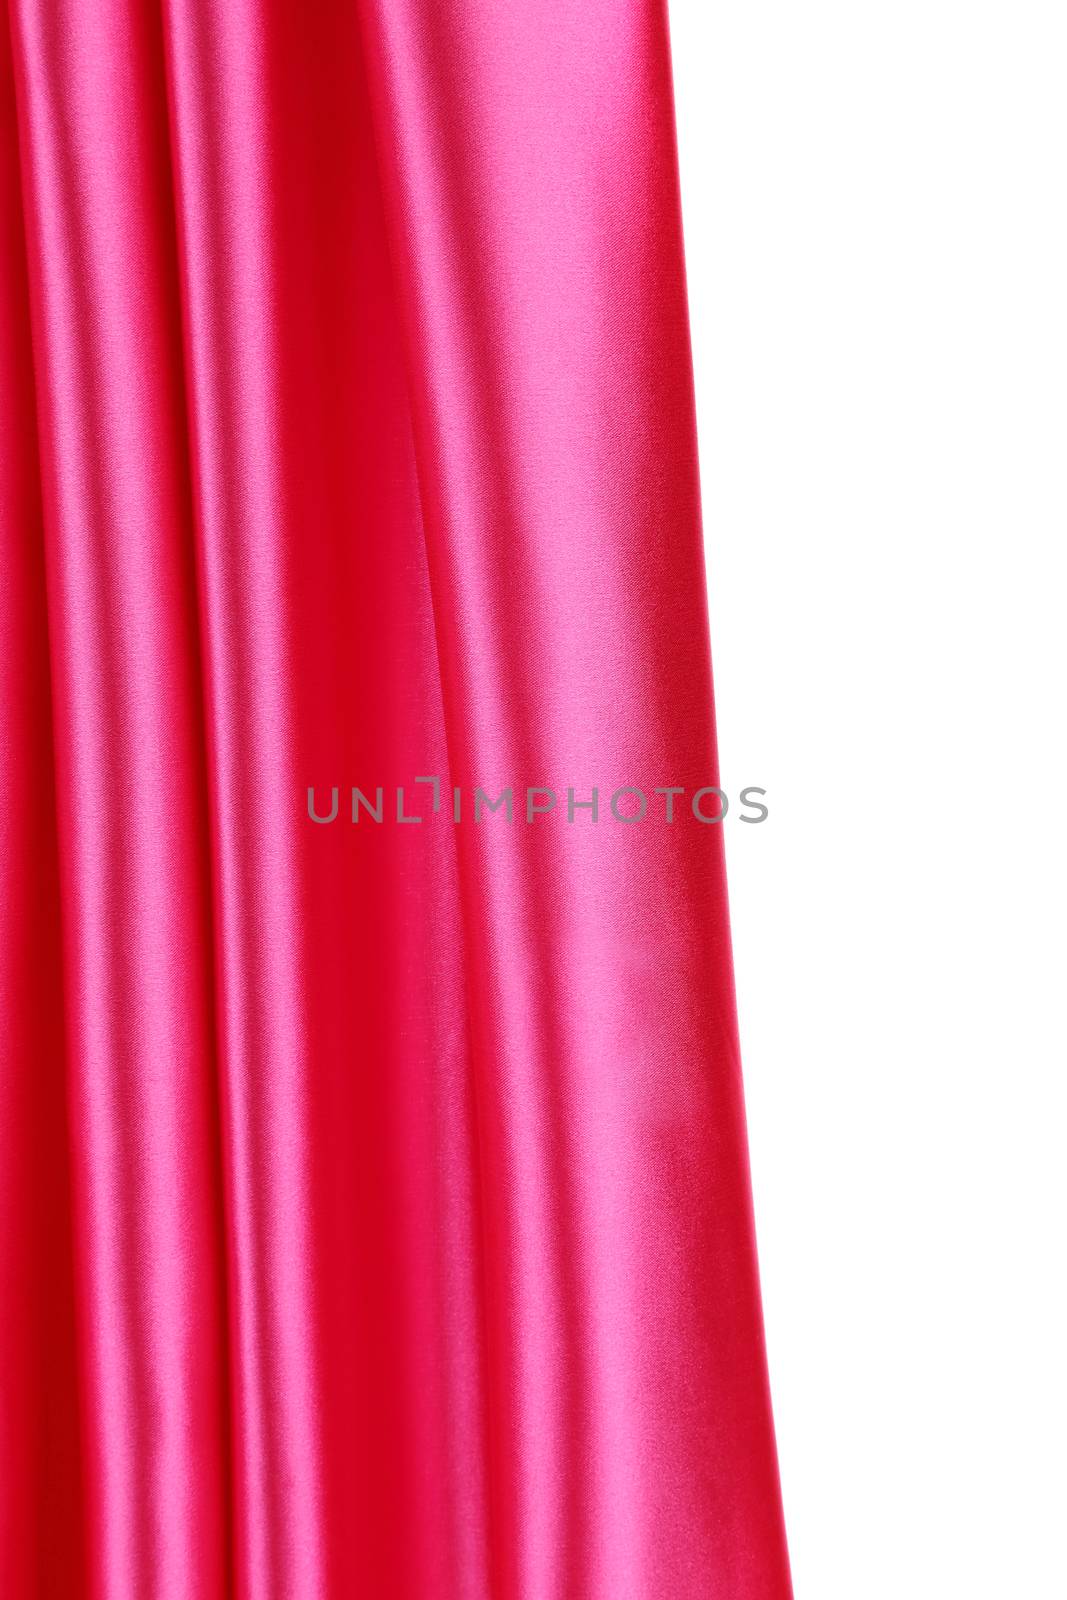 Creases in pink fabric. Close up. Whole background.